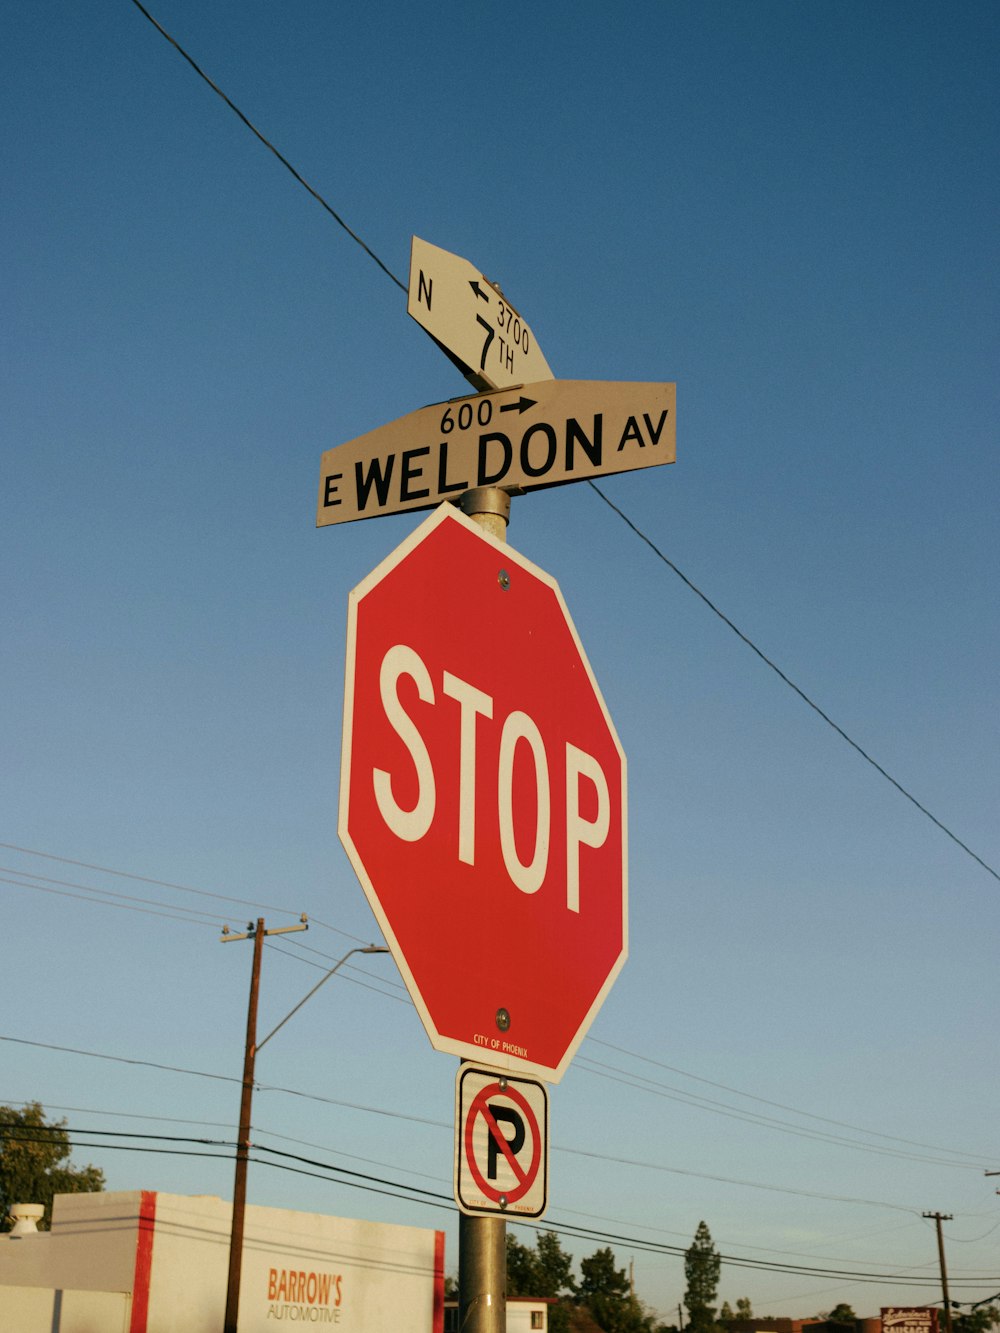 a stop sign with street signs on it